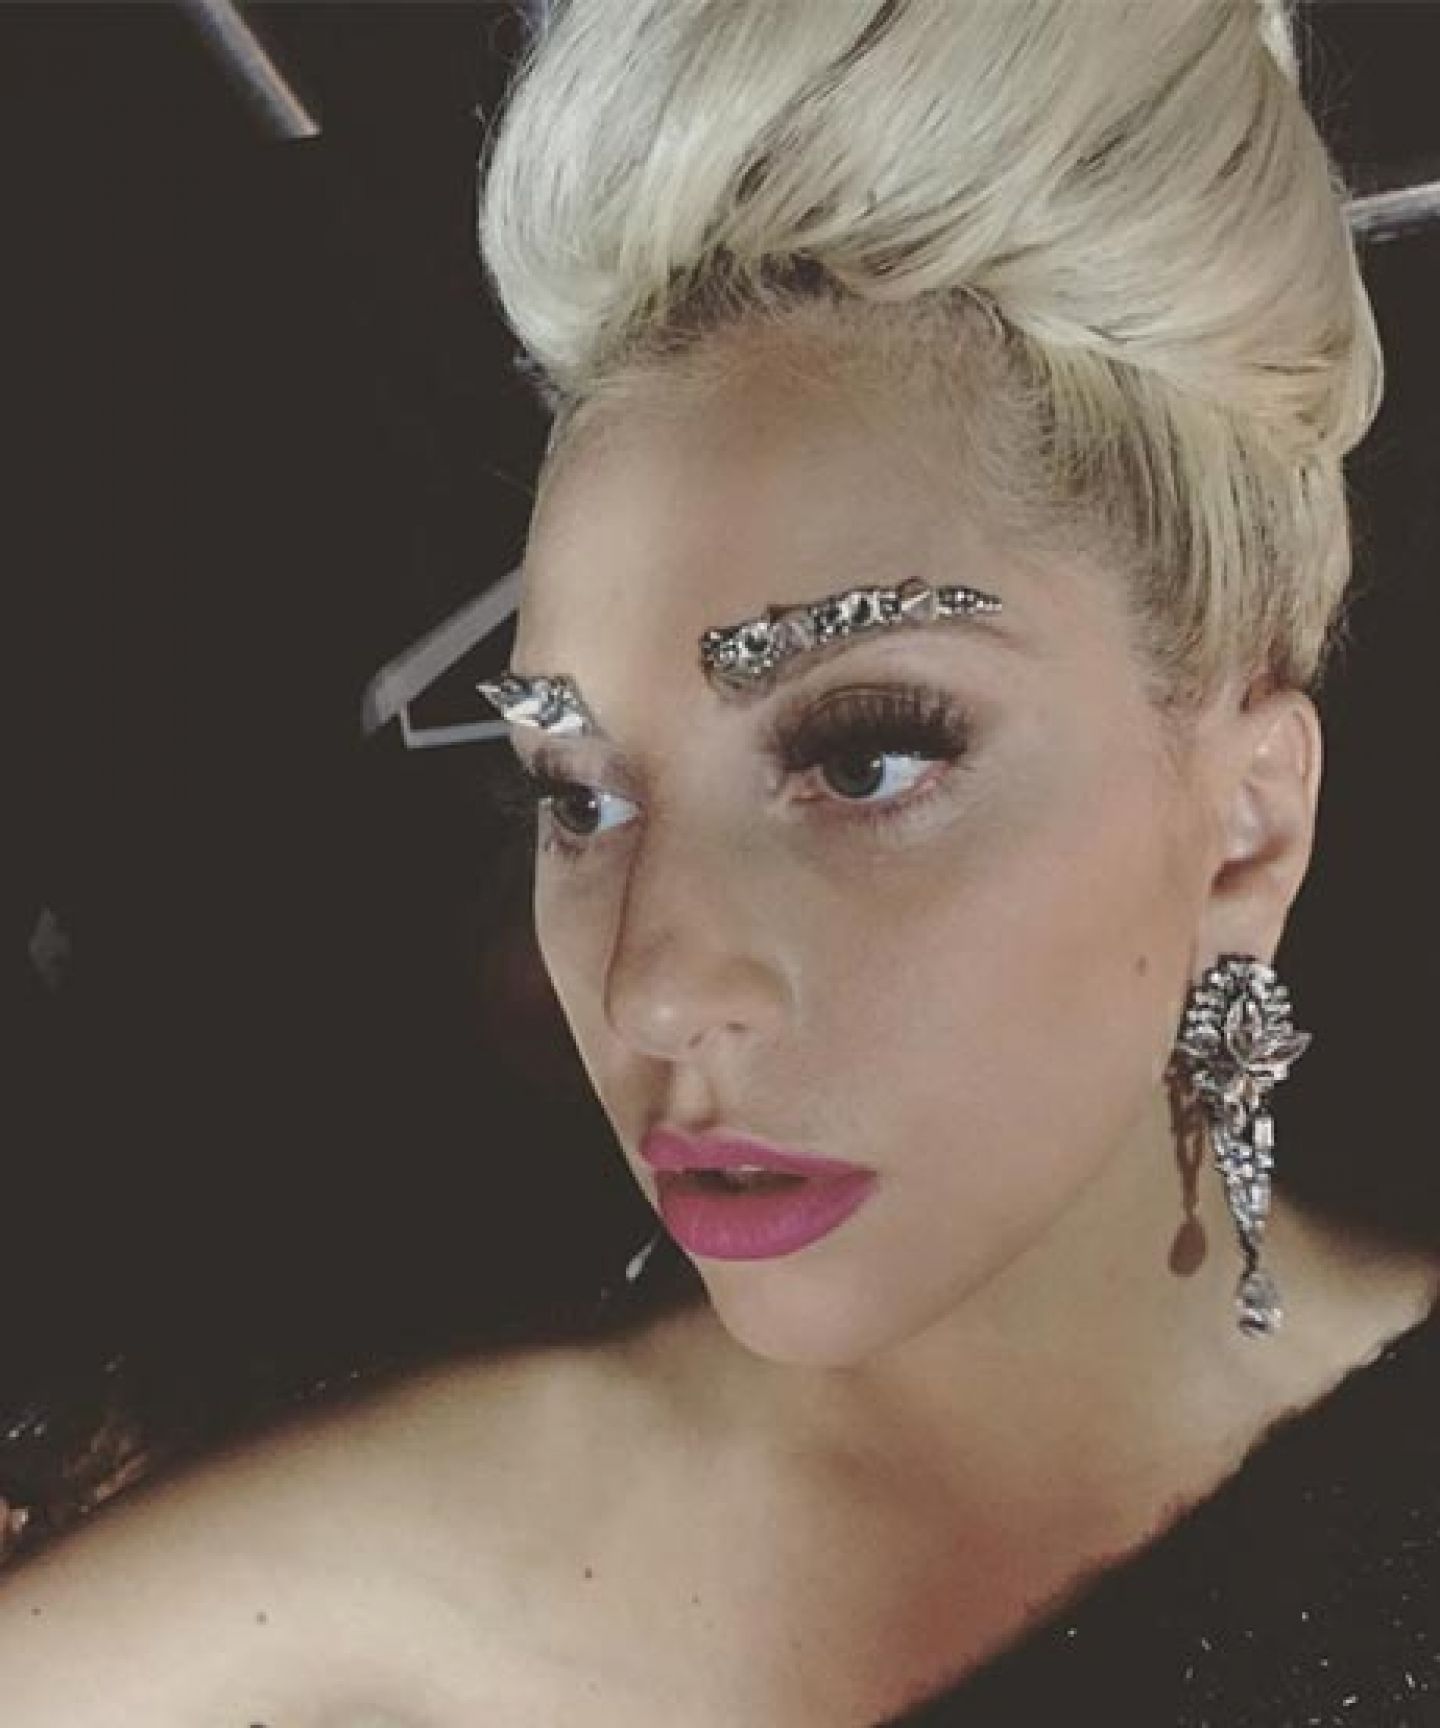 This Is What It Takes To Bedazzle Lady Gaga’s Eyebrows